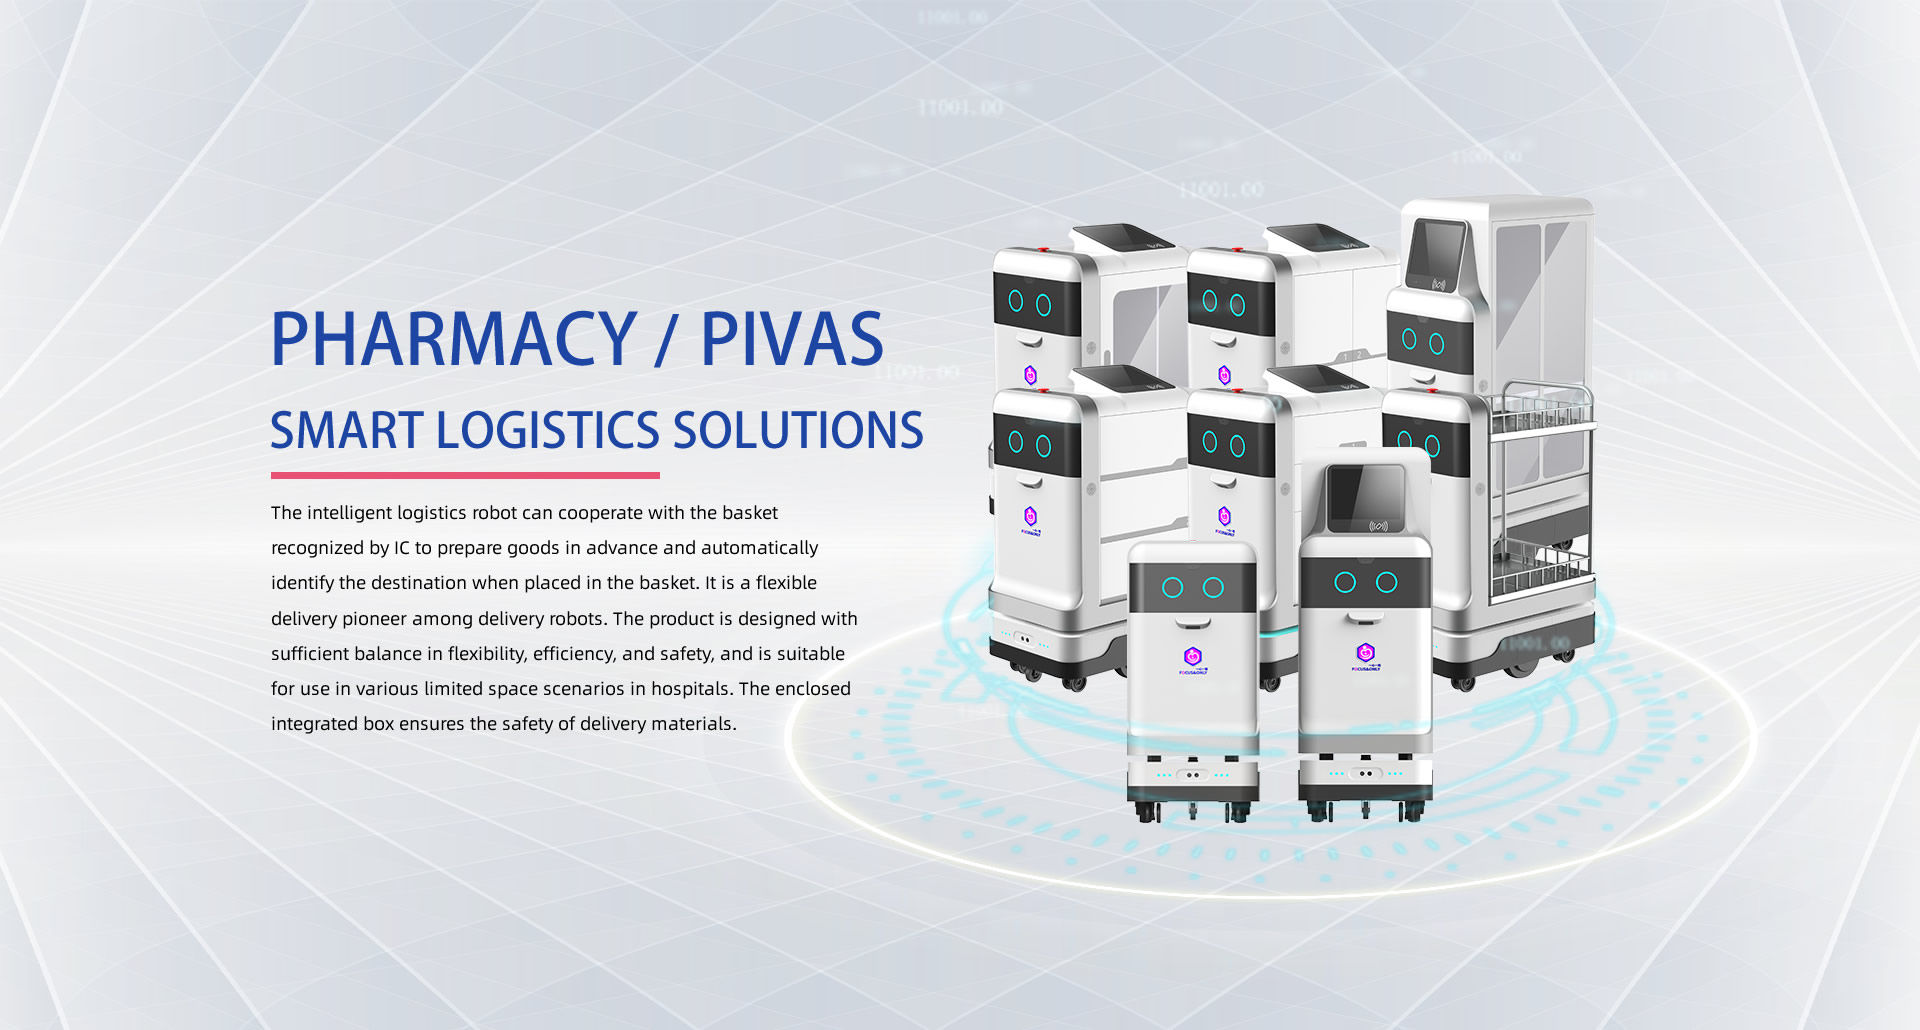 PHARMACY / PIVAS SMART LOGISTICS SOLUTIONS: The intelligent logistics robot can cooperate with the basket recognized by IC to prepare goods in advance and automatically identify the destination when placed in the basket. It is a flexible delivery pioneer among delivery robots. The product is designed with sufficient balance in flexibility, efficiency, and safety, and is suitable for use in various limited space scenarios in hospitals. The enclosed integrated box ensures the safety of delivery materials.